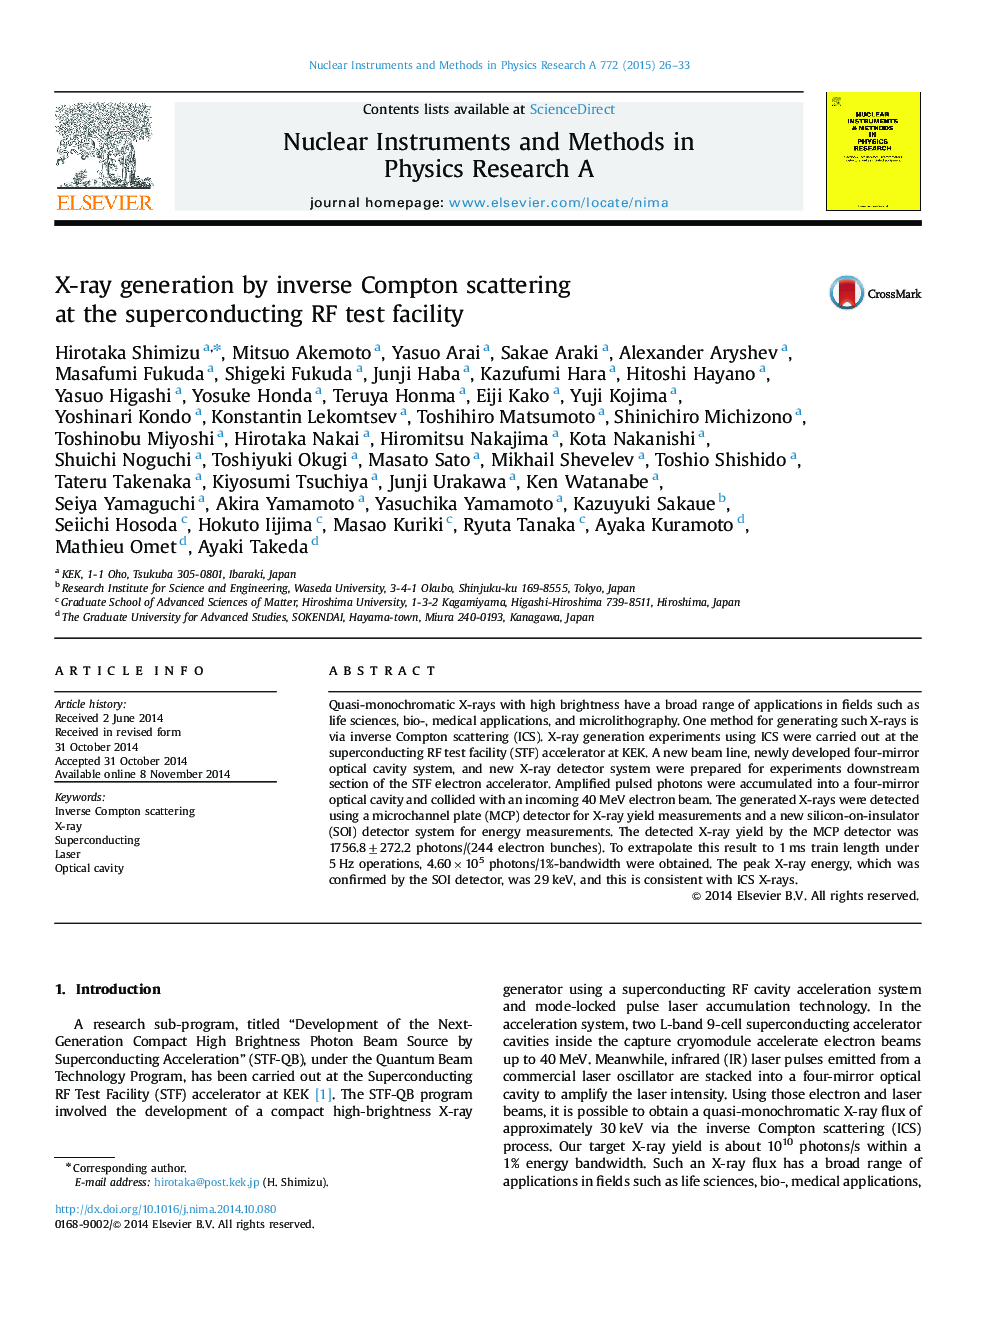 X-ray generation by inverse Compton scattering at the superconducting RF test facility